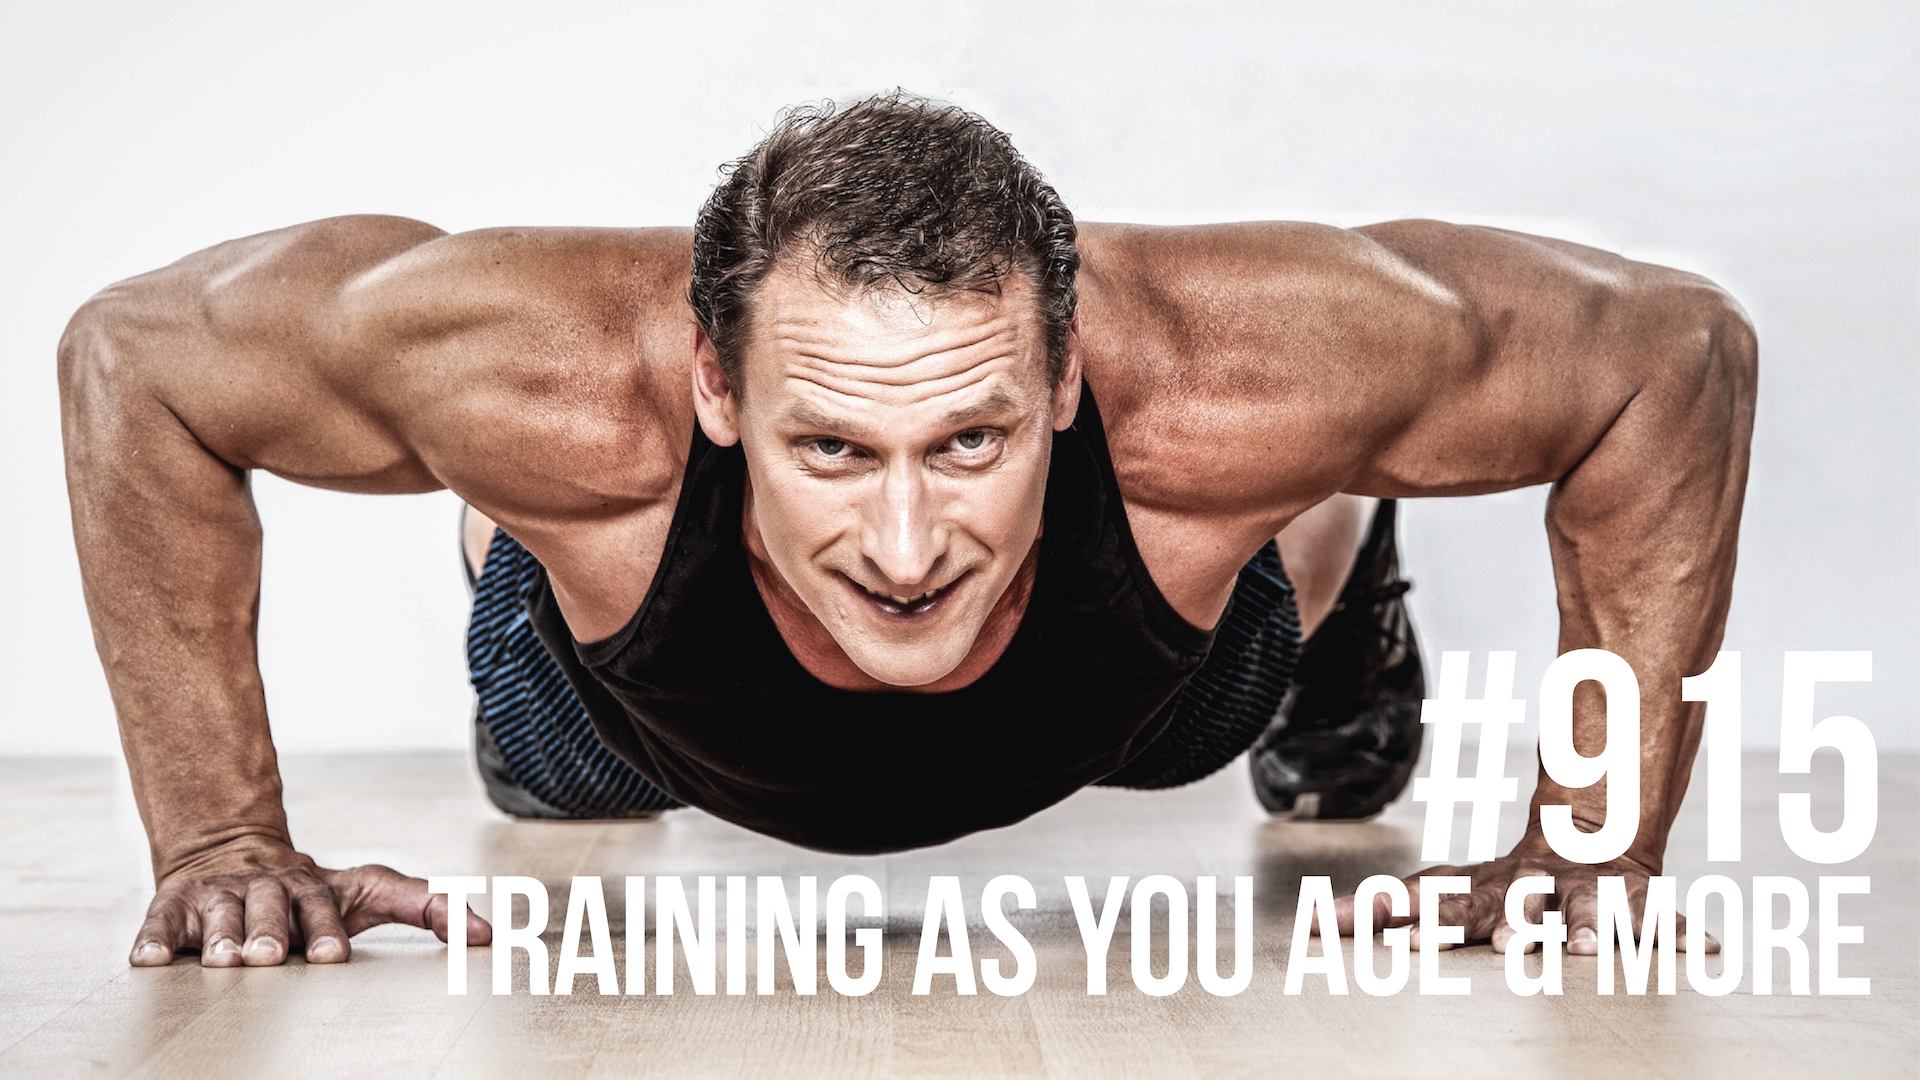 915: Training According to Your Goals, Lifestyle & Age (& MORE)